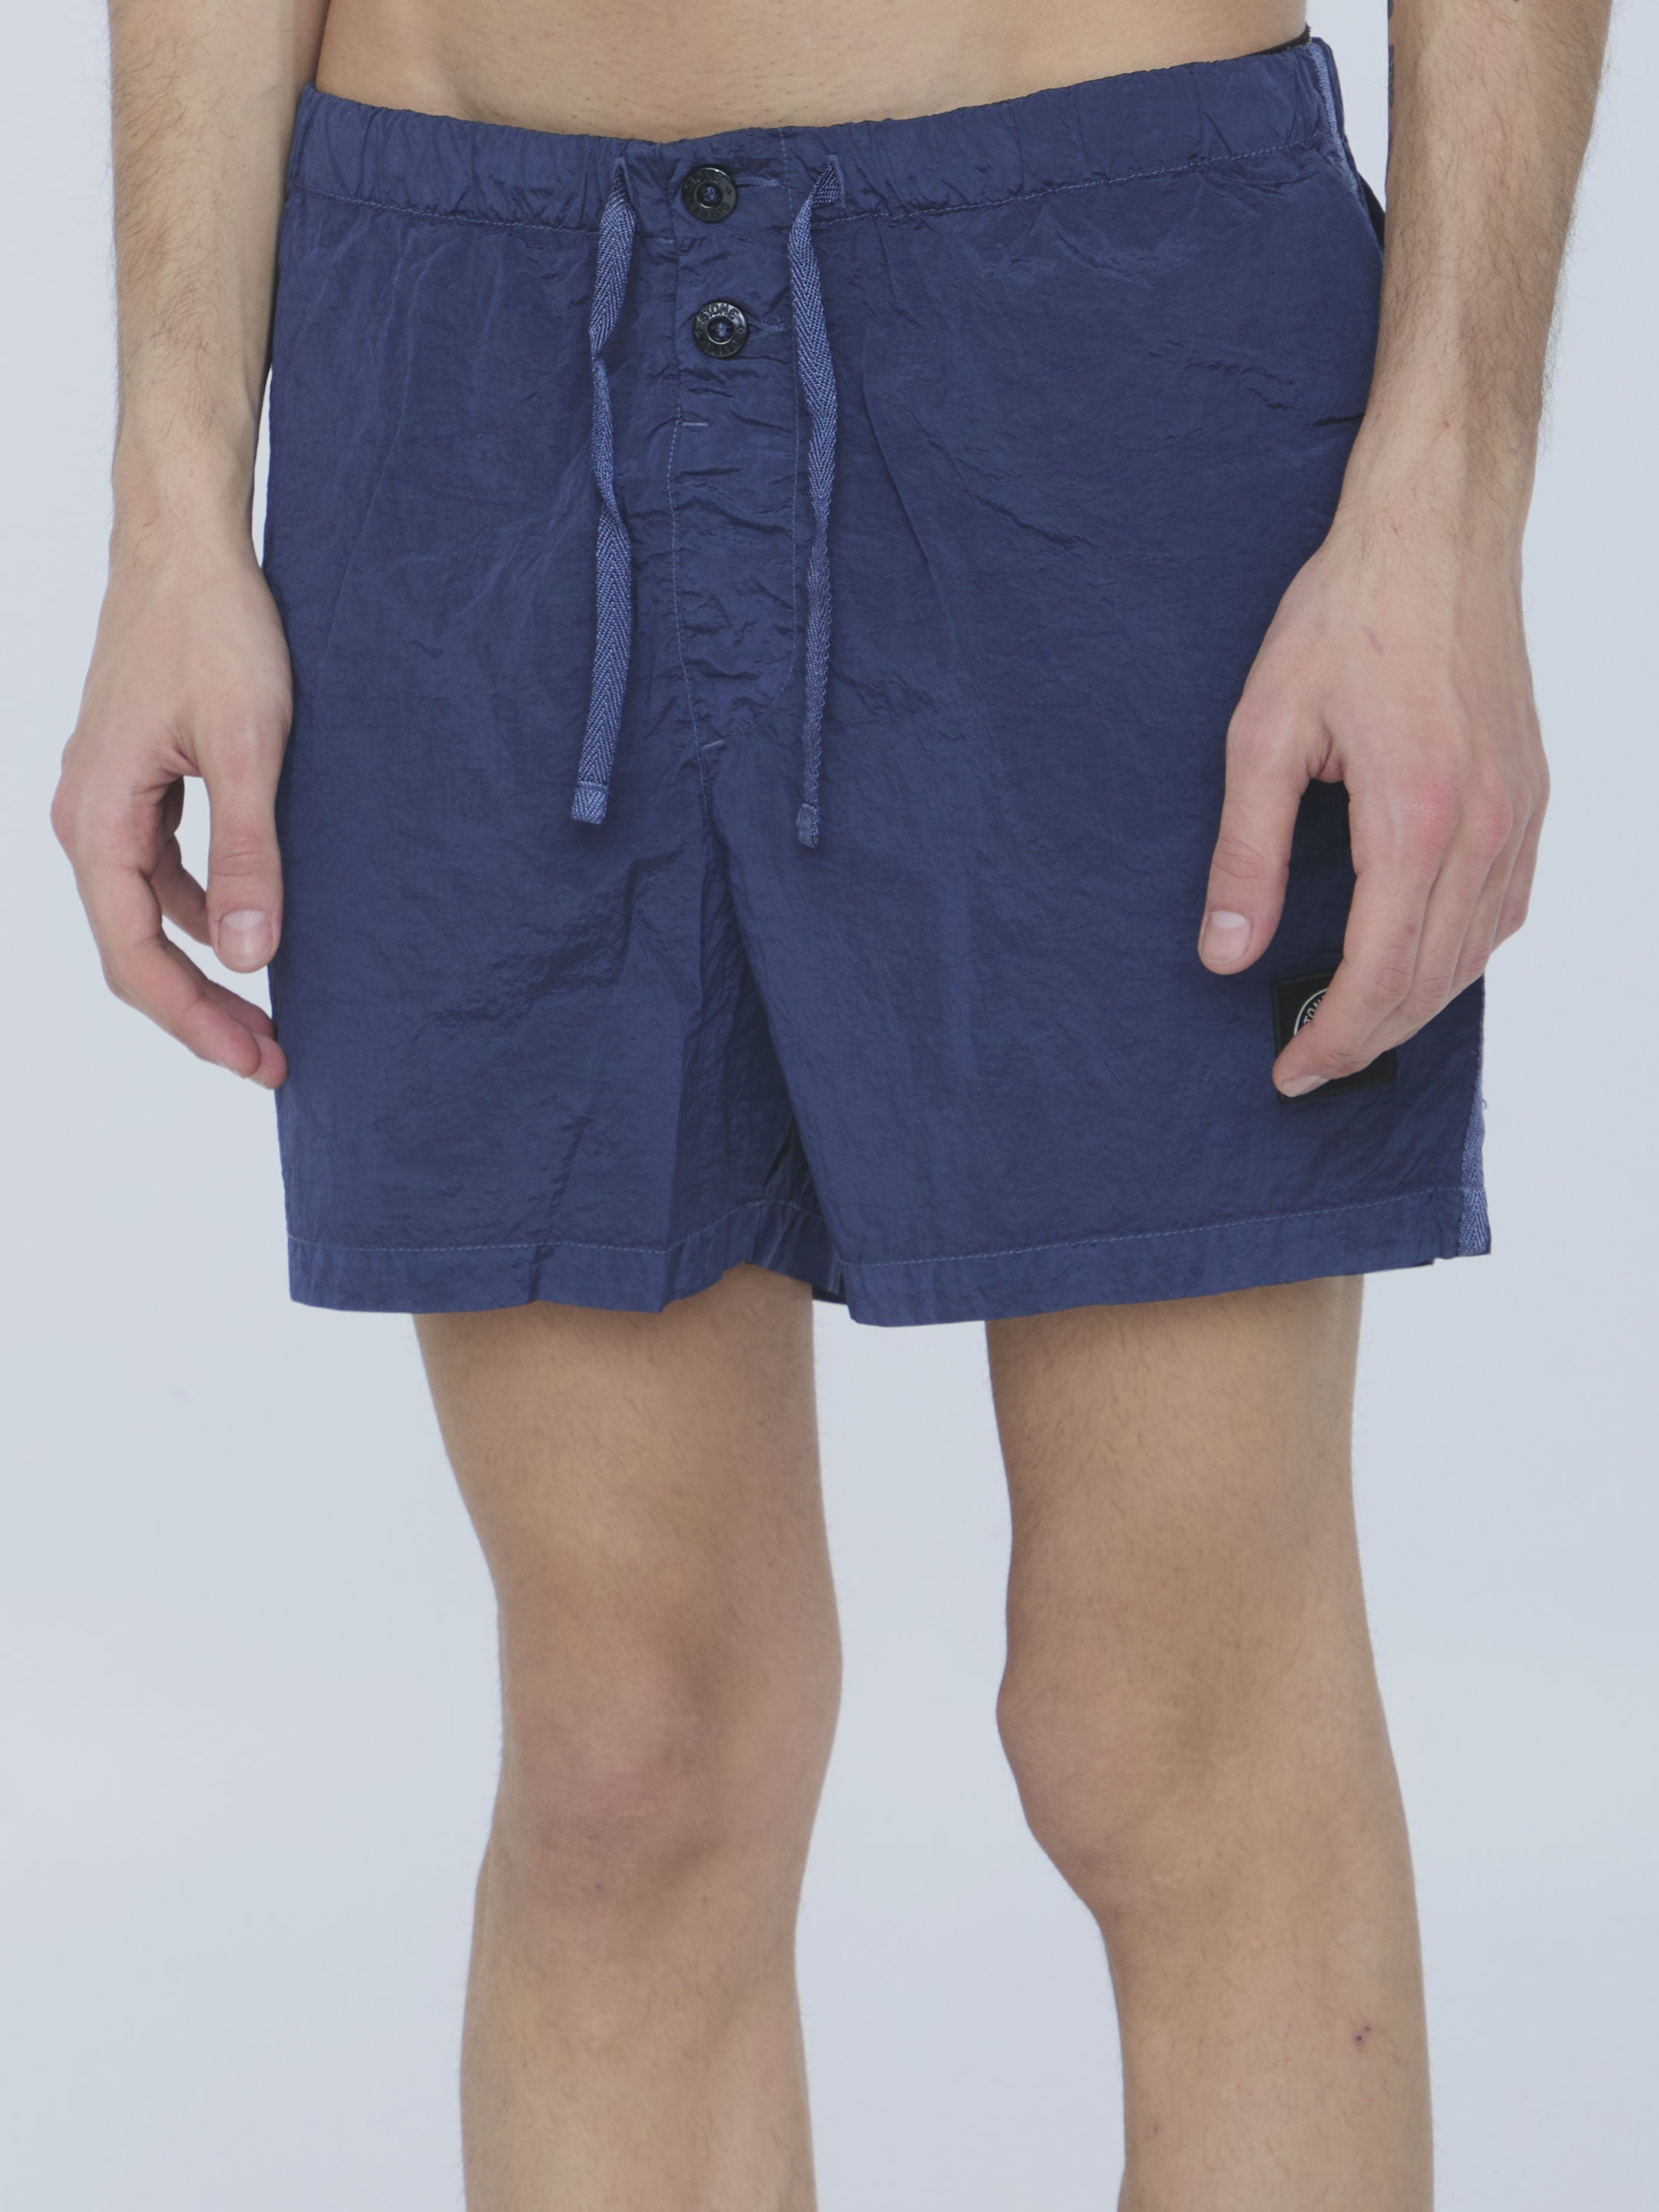 STONE-ISLAND-OUTLET-SALE-Swim-shorts-with-logo-Badebekleidung-ARCHIVE-COLLECTION-2.jpg